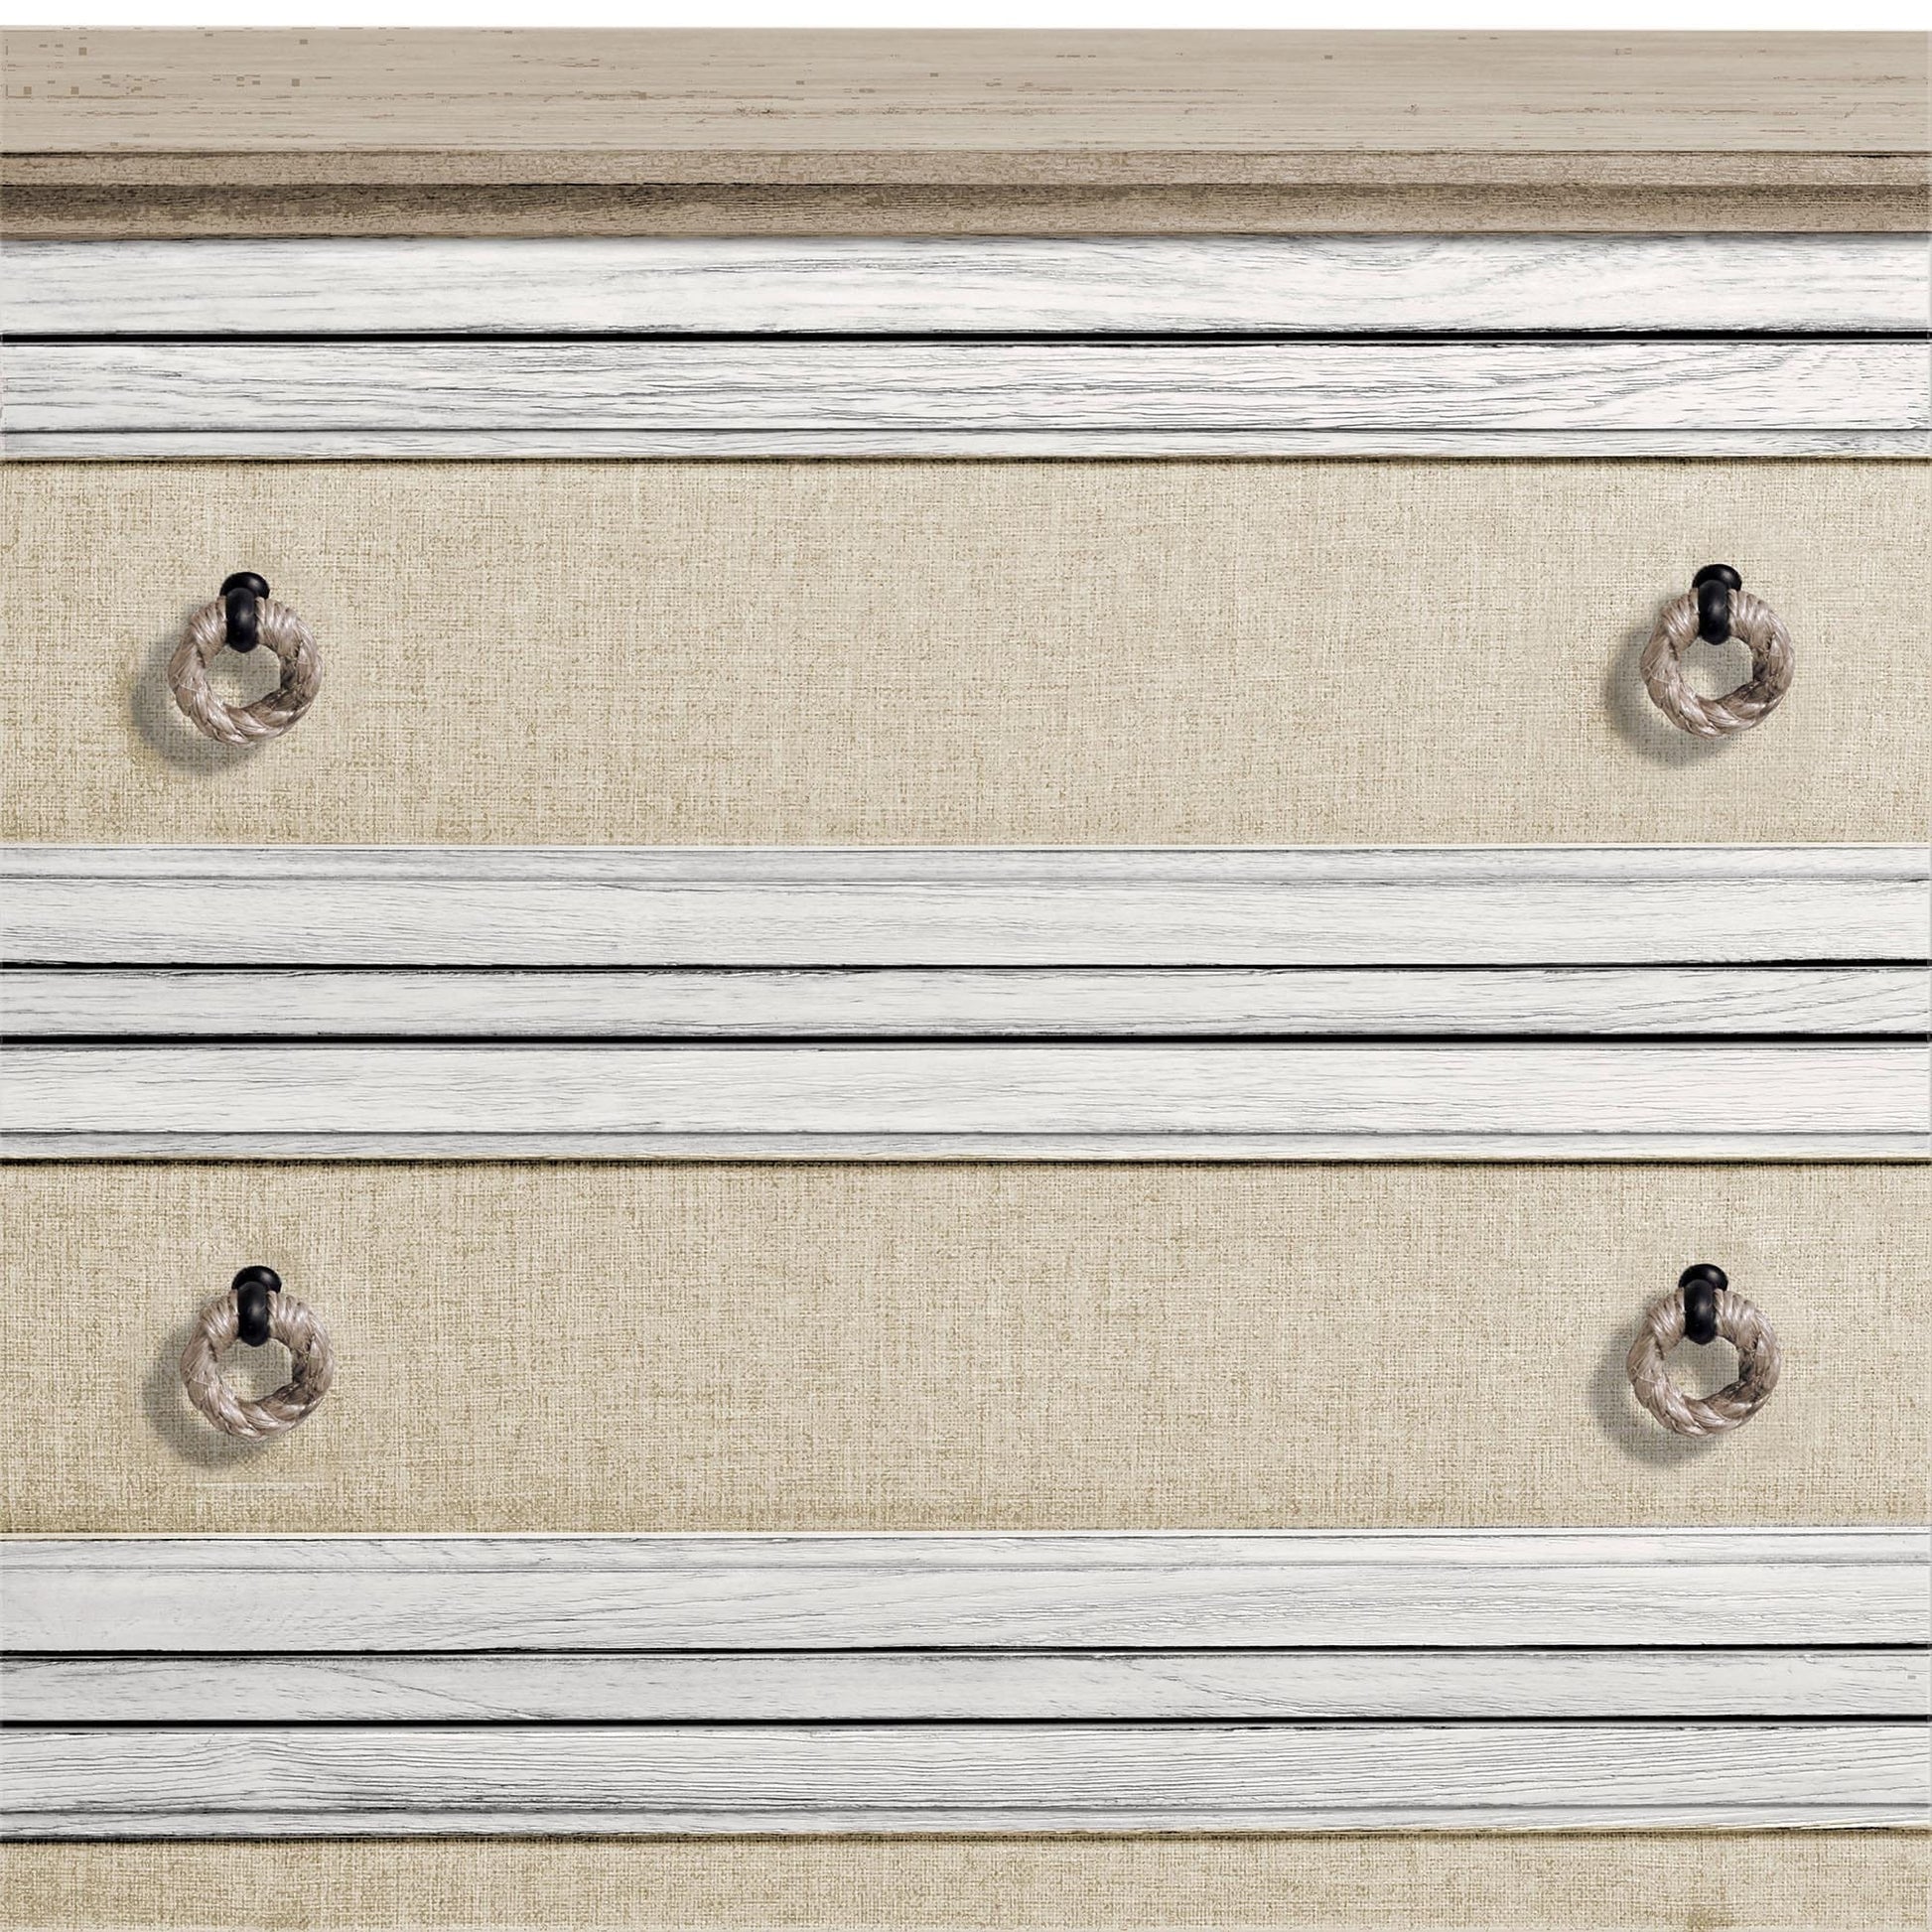 Sea Winds Trading Captiva Island 5-Drawer Chest B86335 Indoor Sea Winds Trading Co 